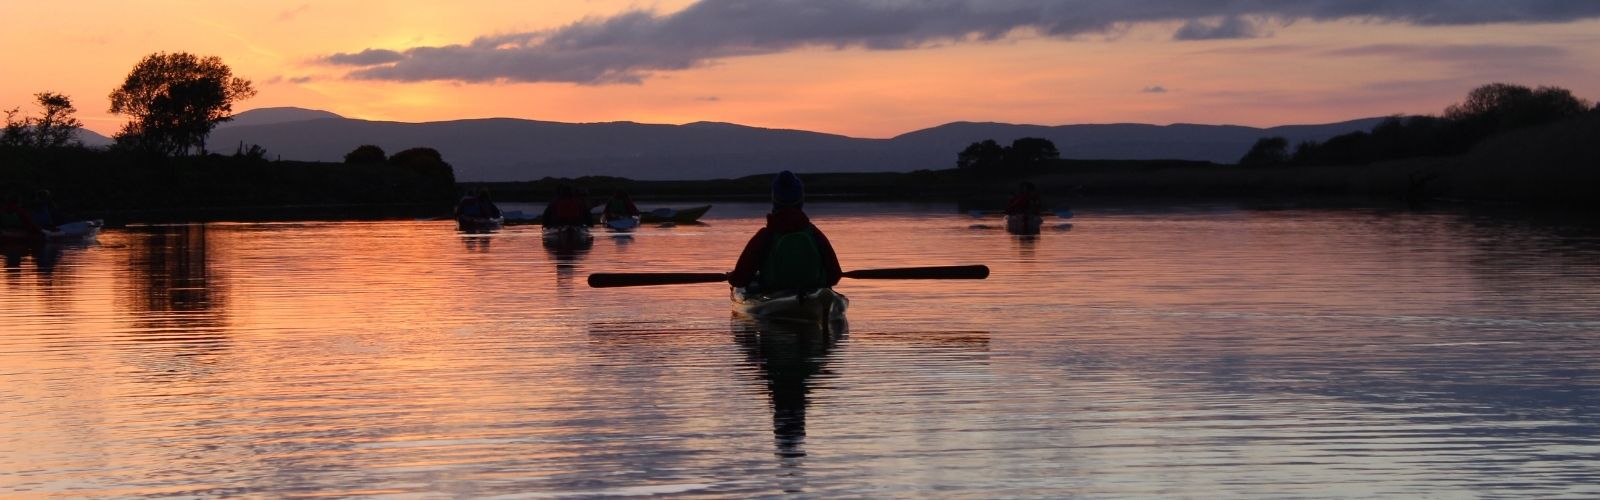 Moonlight Kayak on River Foyle, Derry/L’derry – 20th August 2021